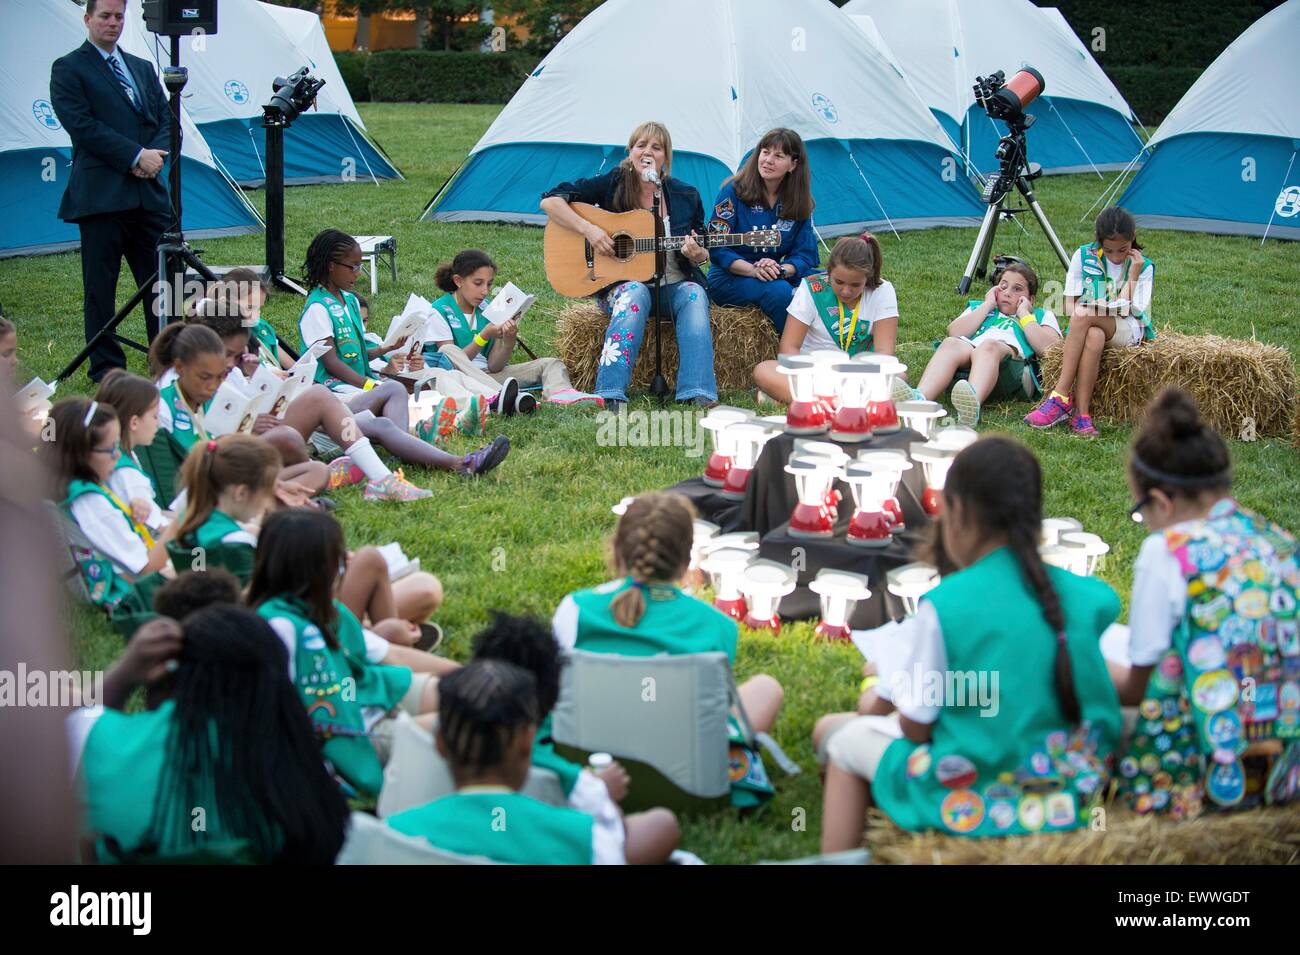 Singer Teresa Suber performs as Astronaut Cady Coleman looks on during the first-ever White House Campout with fifty fourth-grade Girl Scouts as part of the Let's Move! Outside initiative on the South Lawn of the White House June 30, 2015 in Washington, DC. In addition to the campout the girls enjoyed stargazing activity with scientists and astronaut Cady Coleman. Stock Photo